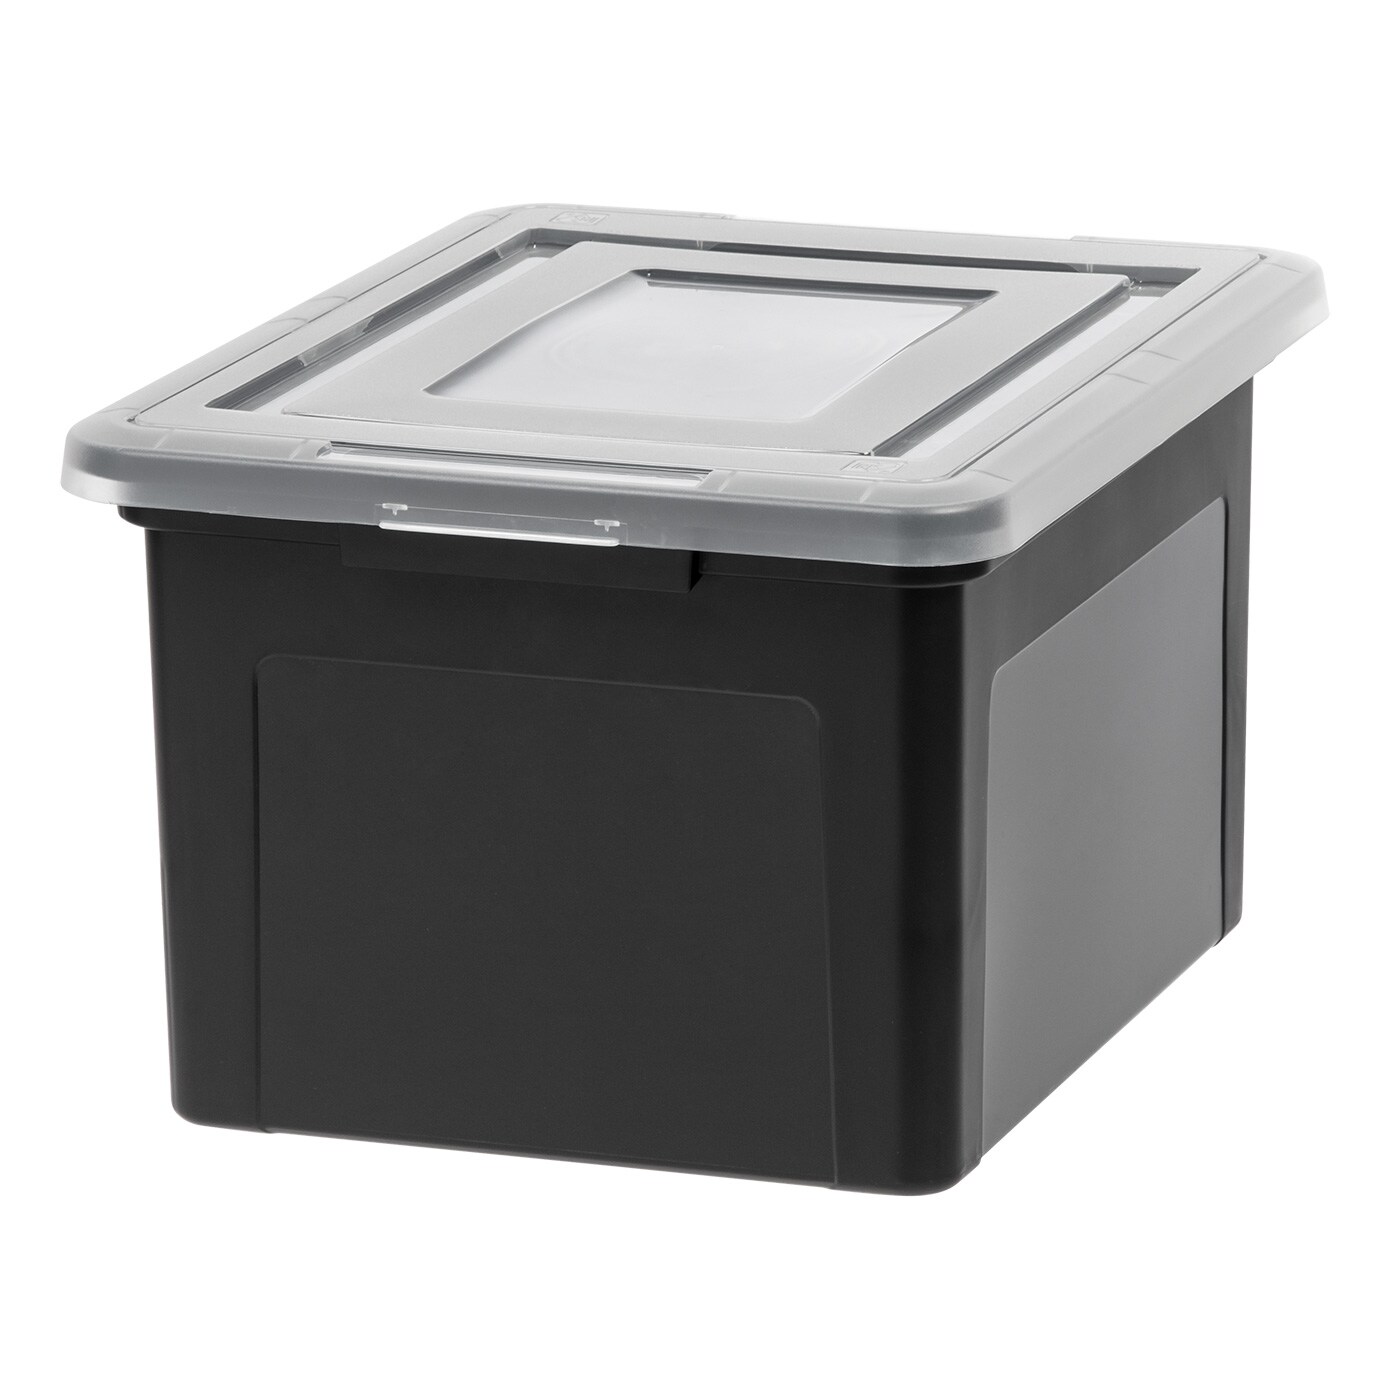 IRIS USA Letter/Legal File Tote Box, BPA-Free Plastic Storage Bin Tote Organizer with Durable and Secure Latching Lid, Stackable and Nestable, Black/Clear